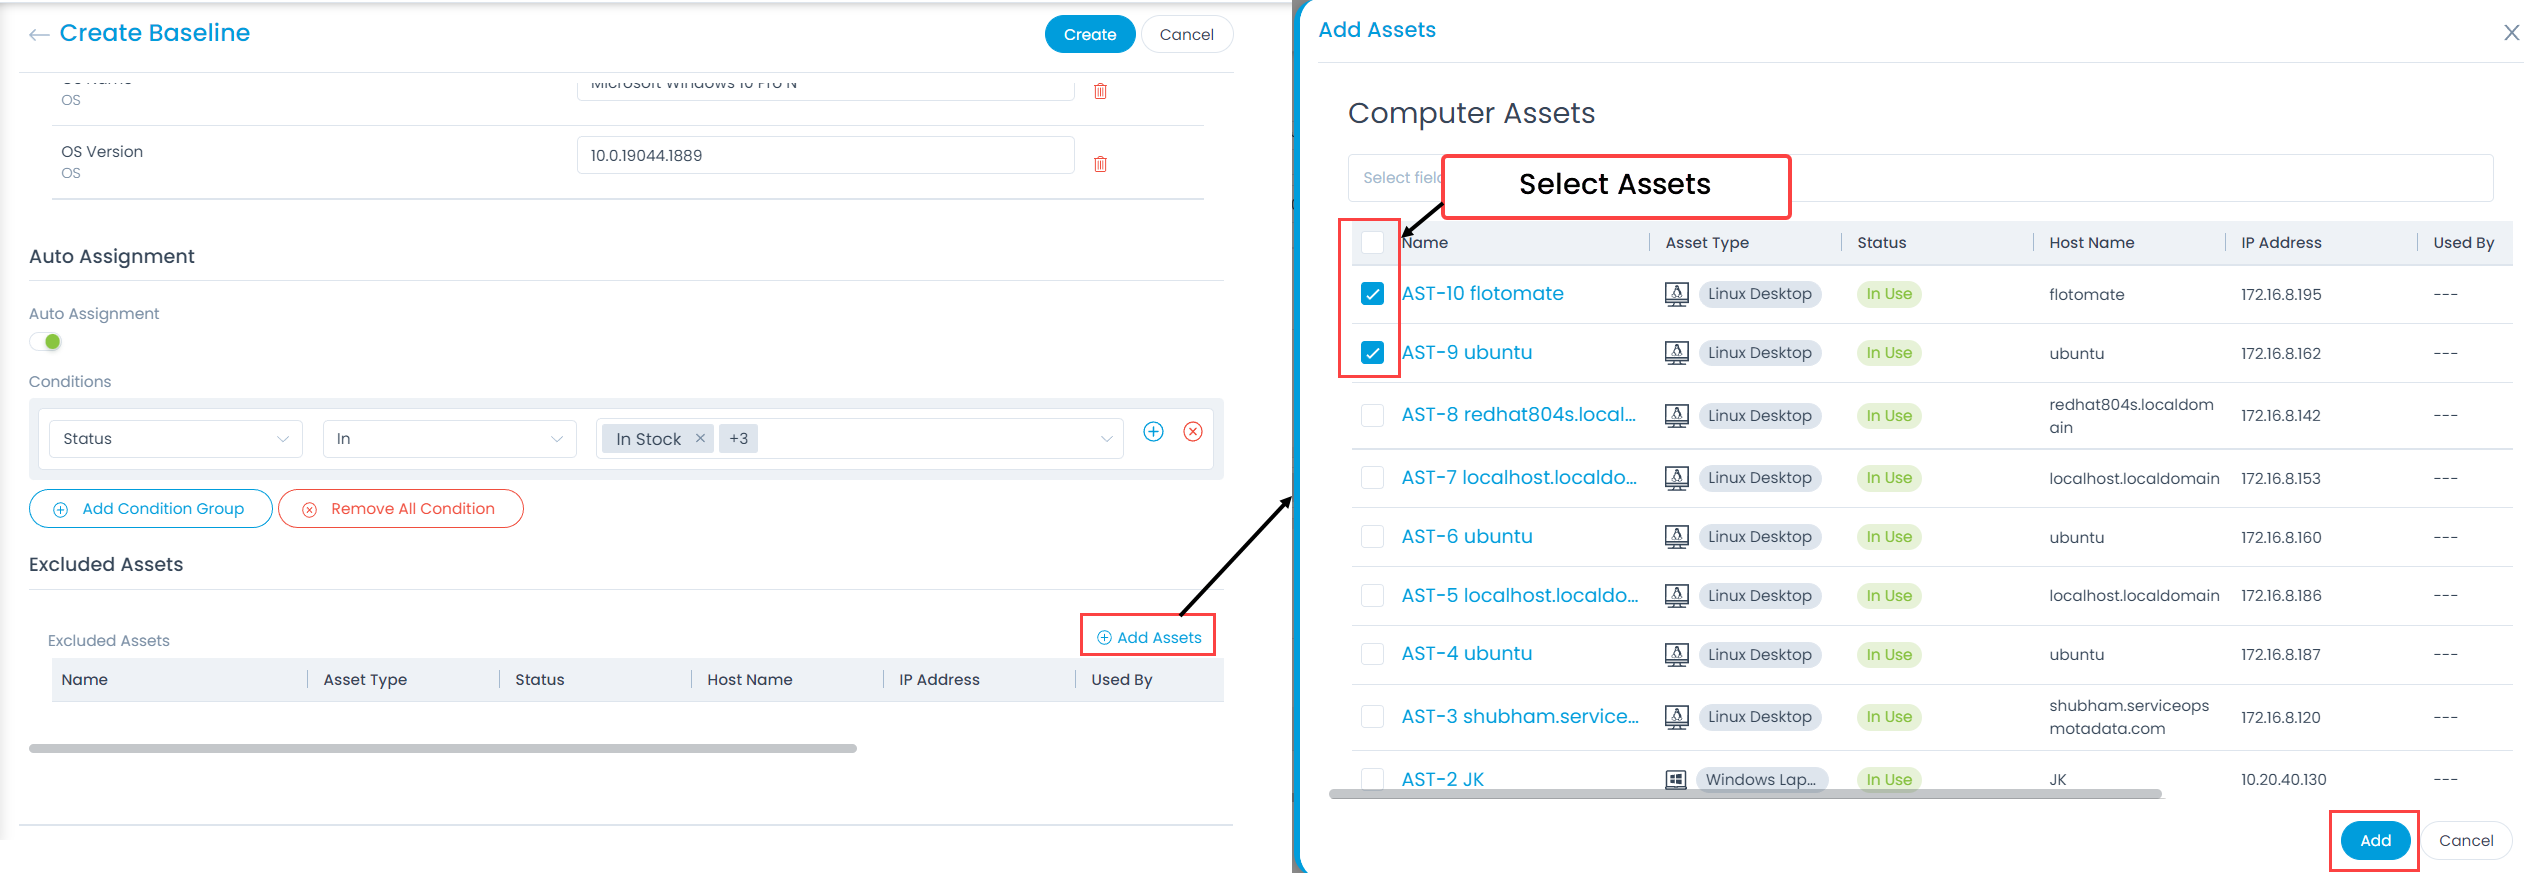 Add Assets to Exclude